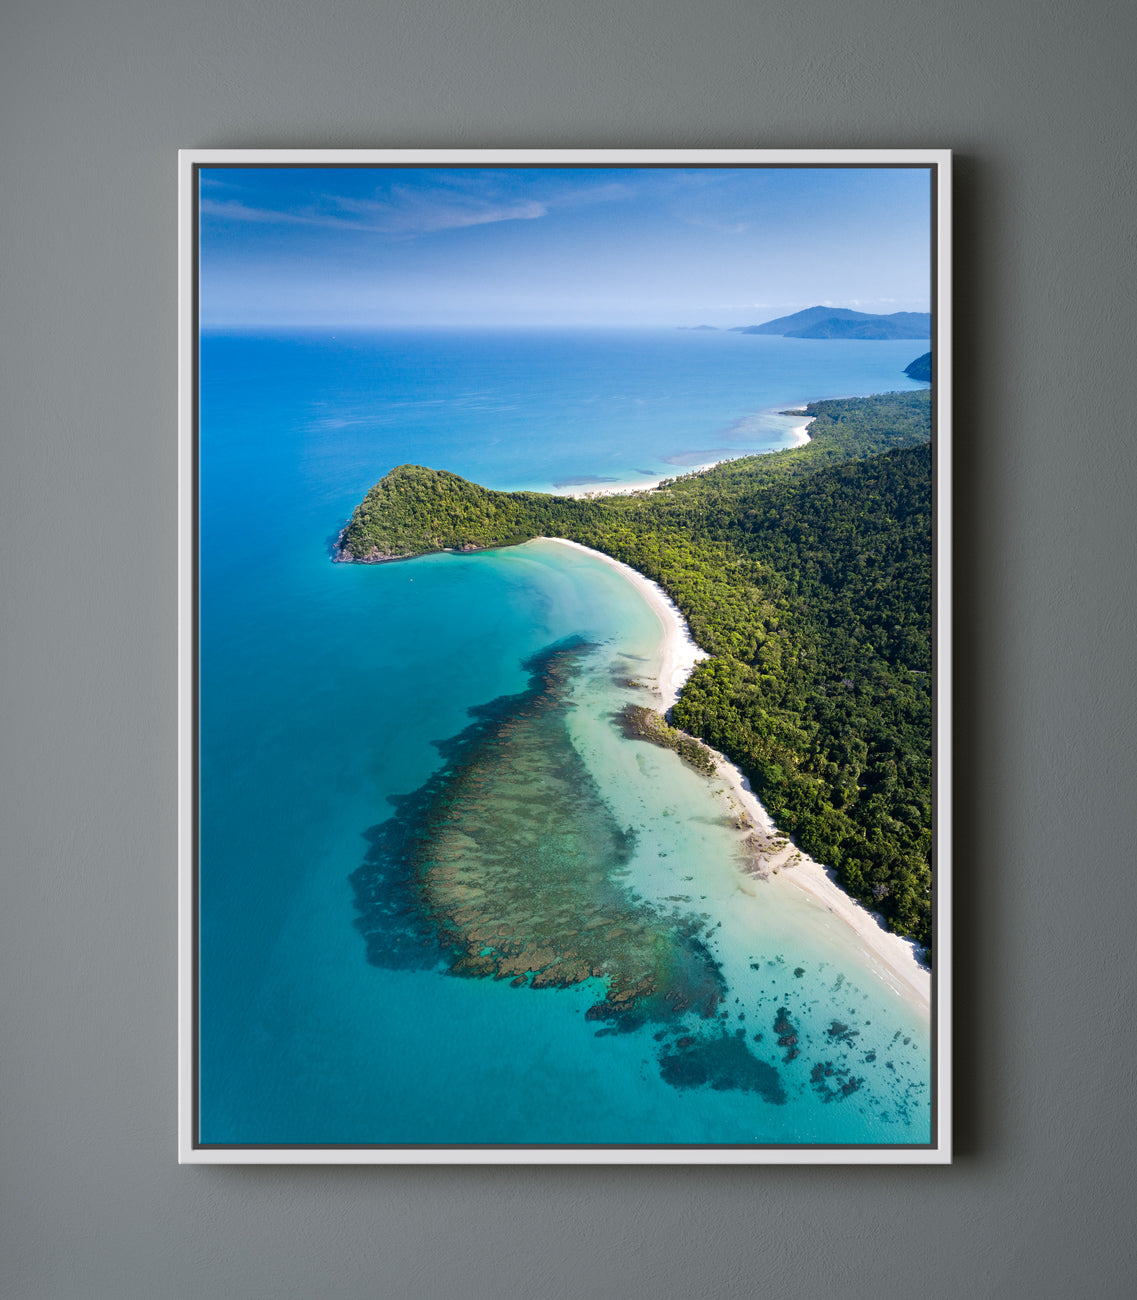 The Mighty Daintree - Cape Tribulation - Dave Wilcock Photography